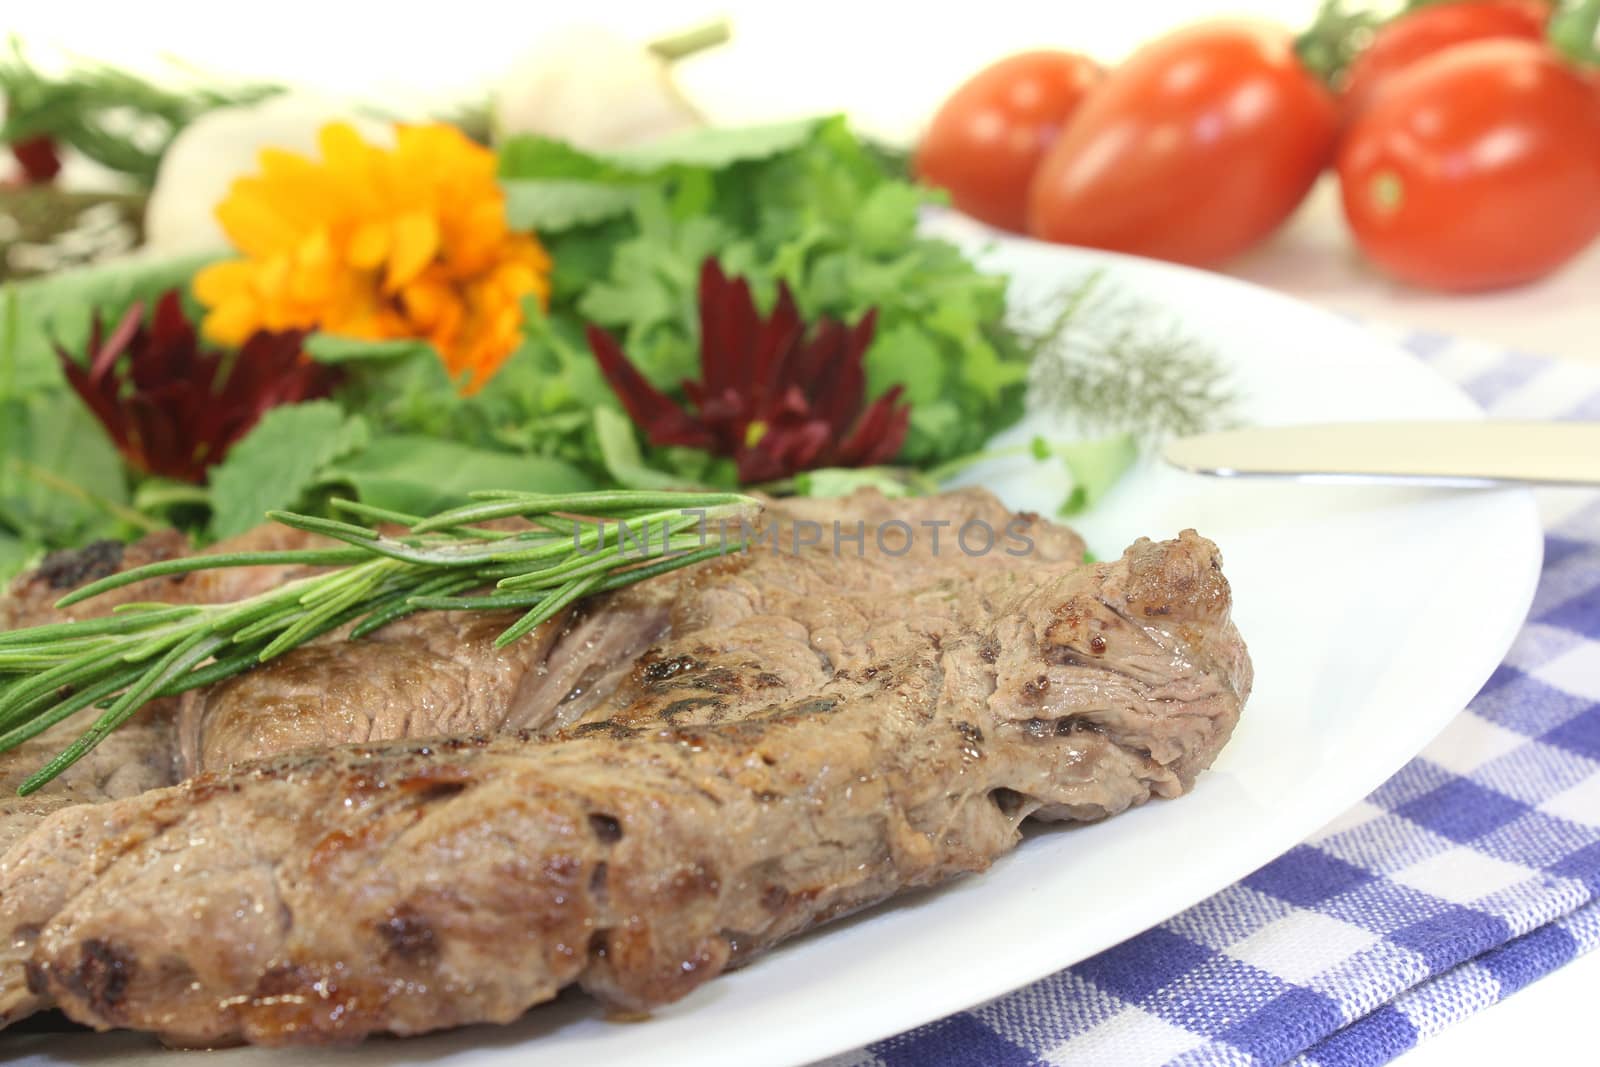 fried Sirloin steak with wild herb salad on a light background